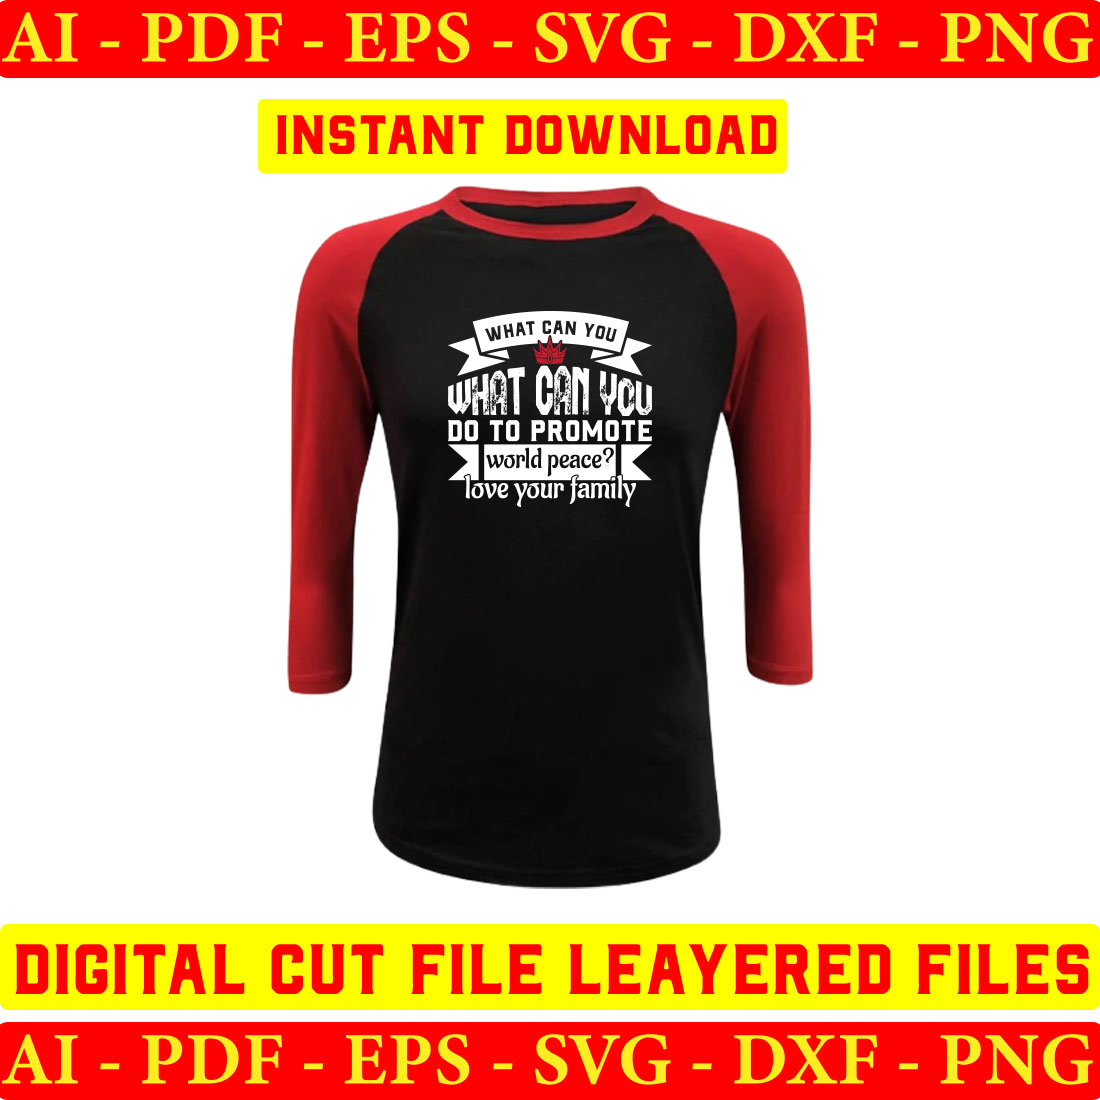 Black and red baseball shirt with the words instant file layered files.